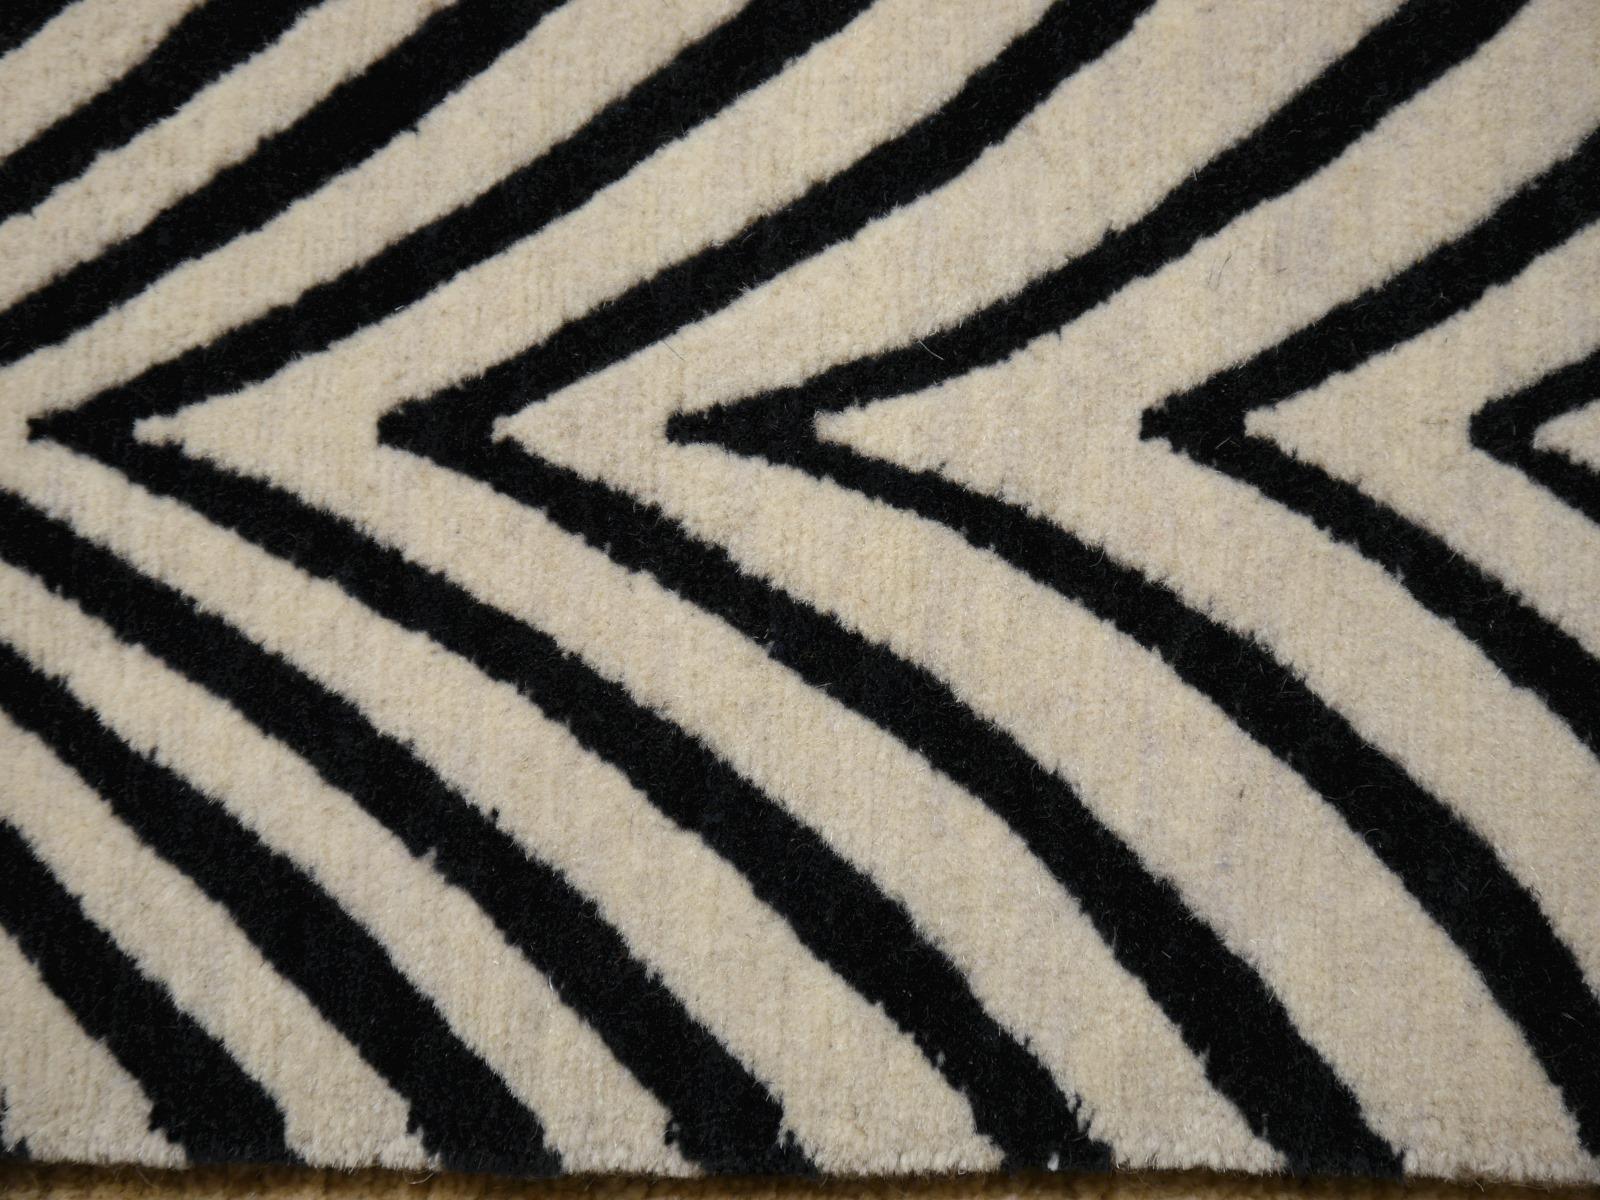 A Zebra design rug, contemporary production, in style of Art Deco, hand knotted, using finest Tibetan highland wool.

Very fine wool and quality. 

Current production, other sizes can be made on order.

A real eye catcher. The zebra pattern on